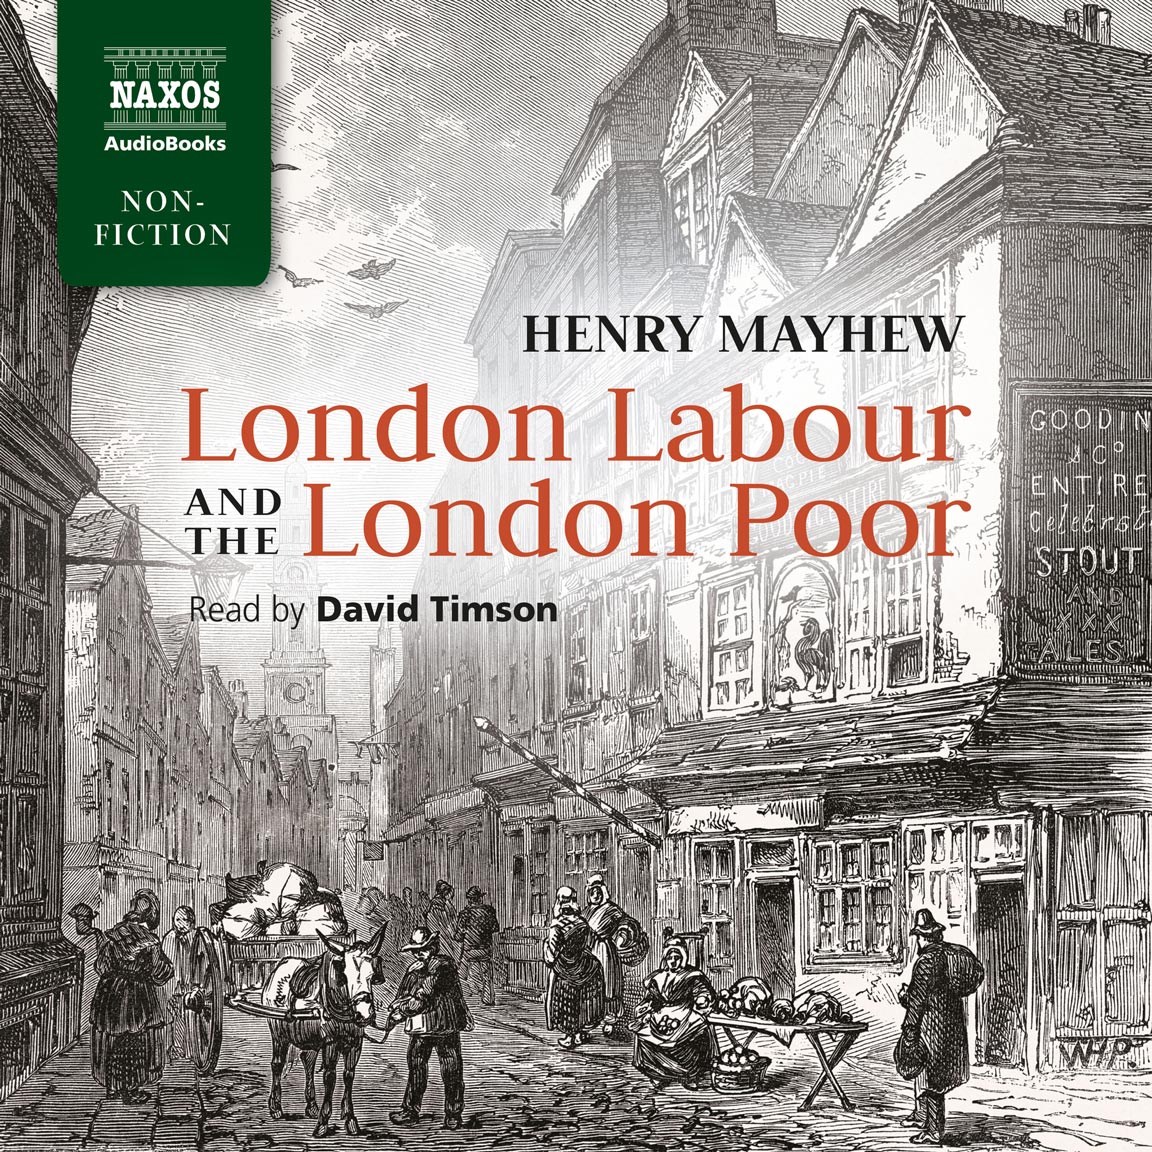 London Labour and the London Poor (unabridged)